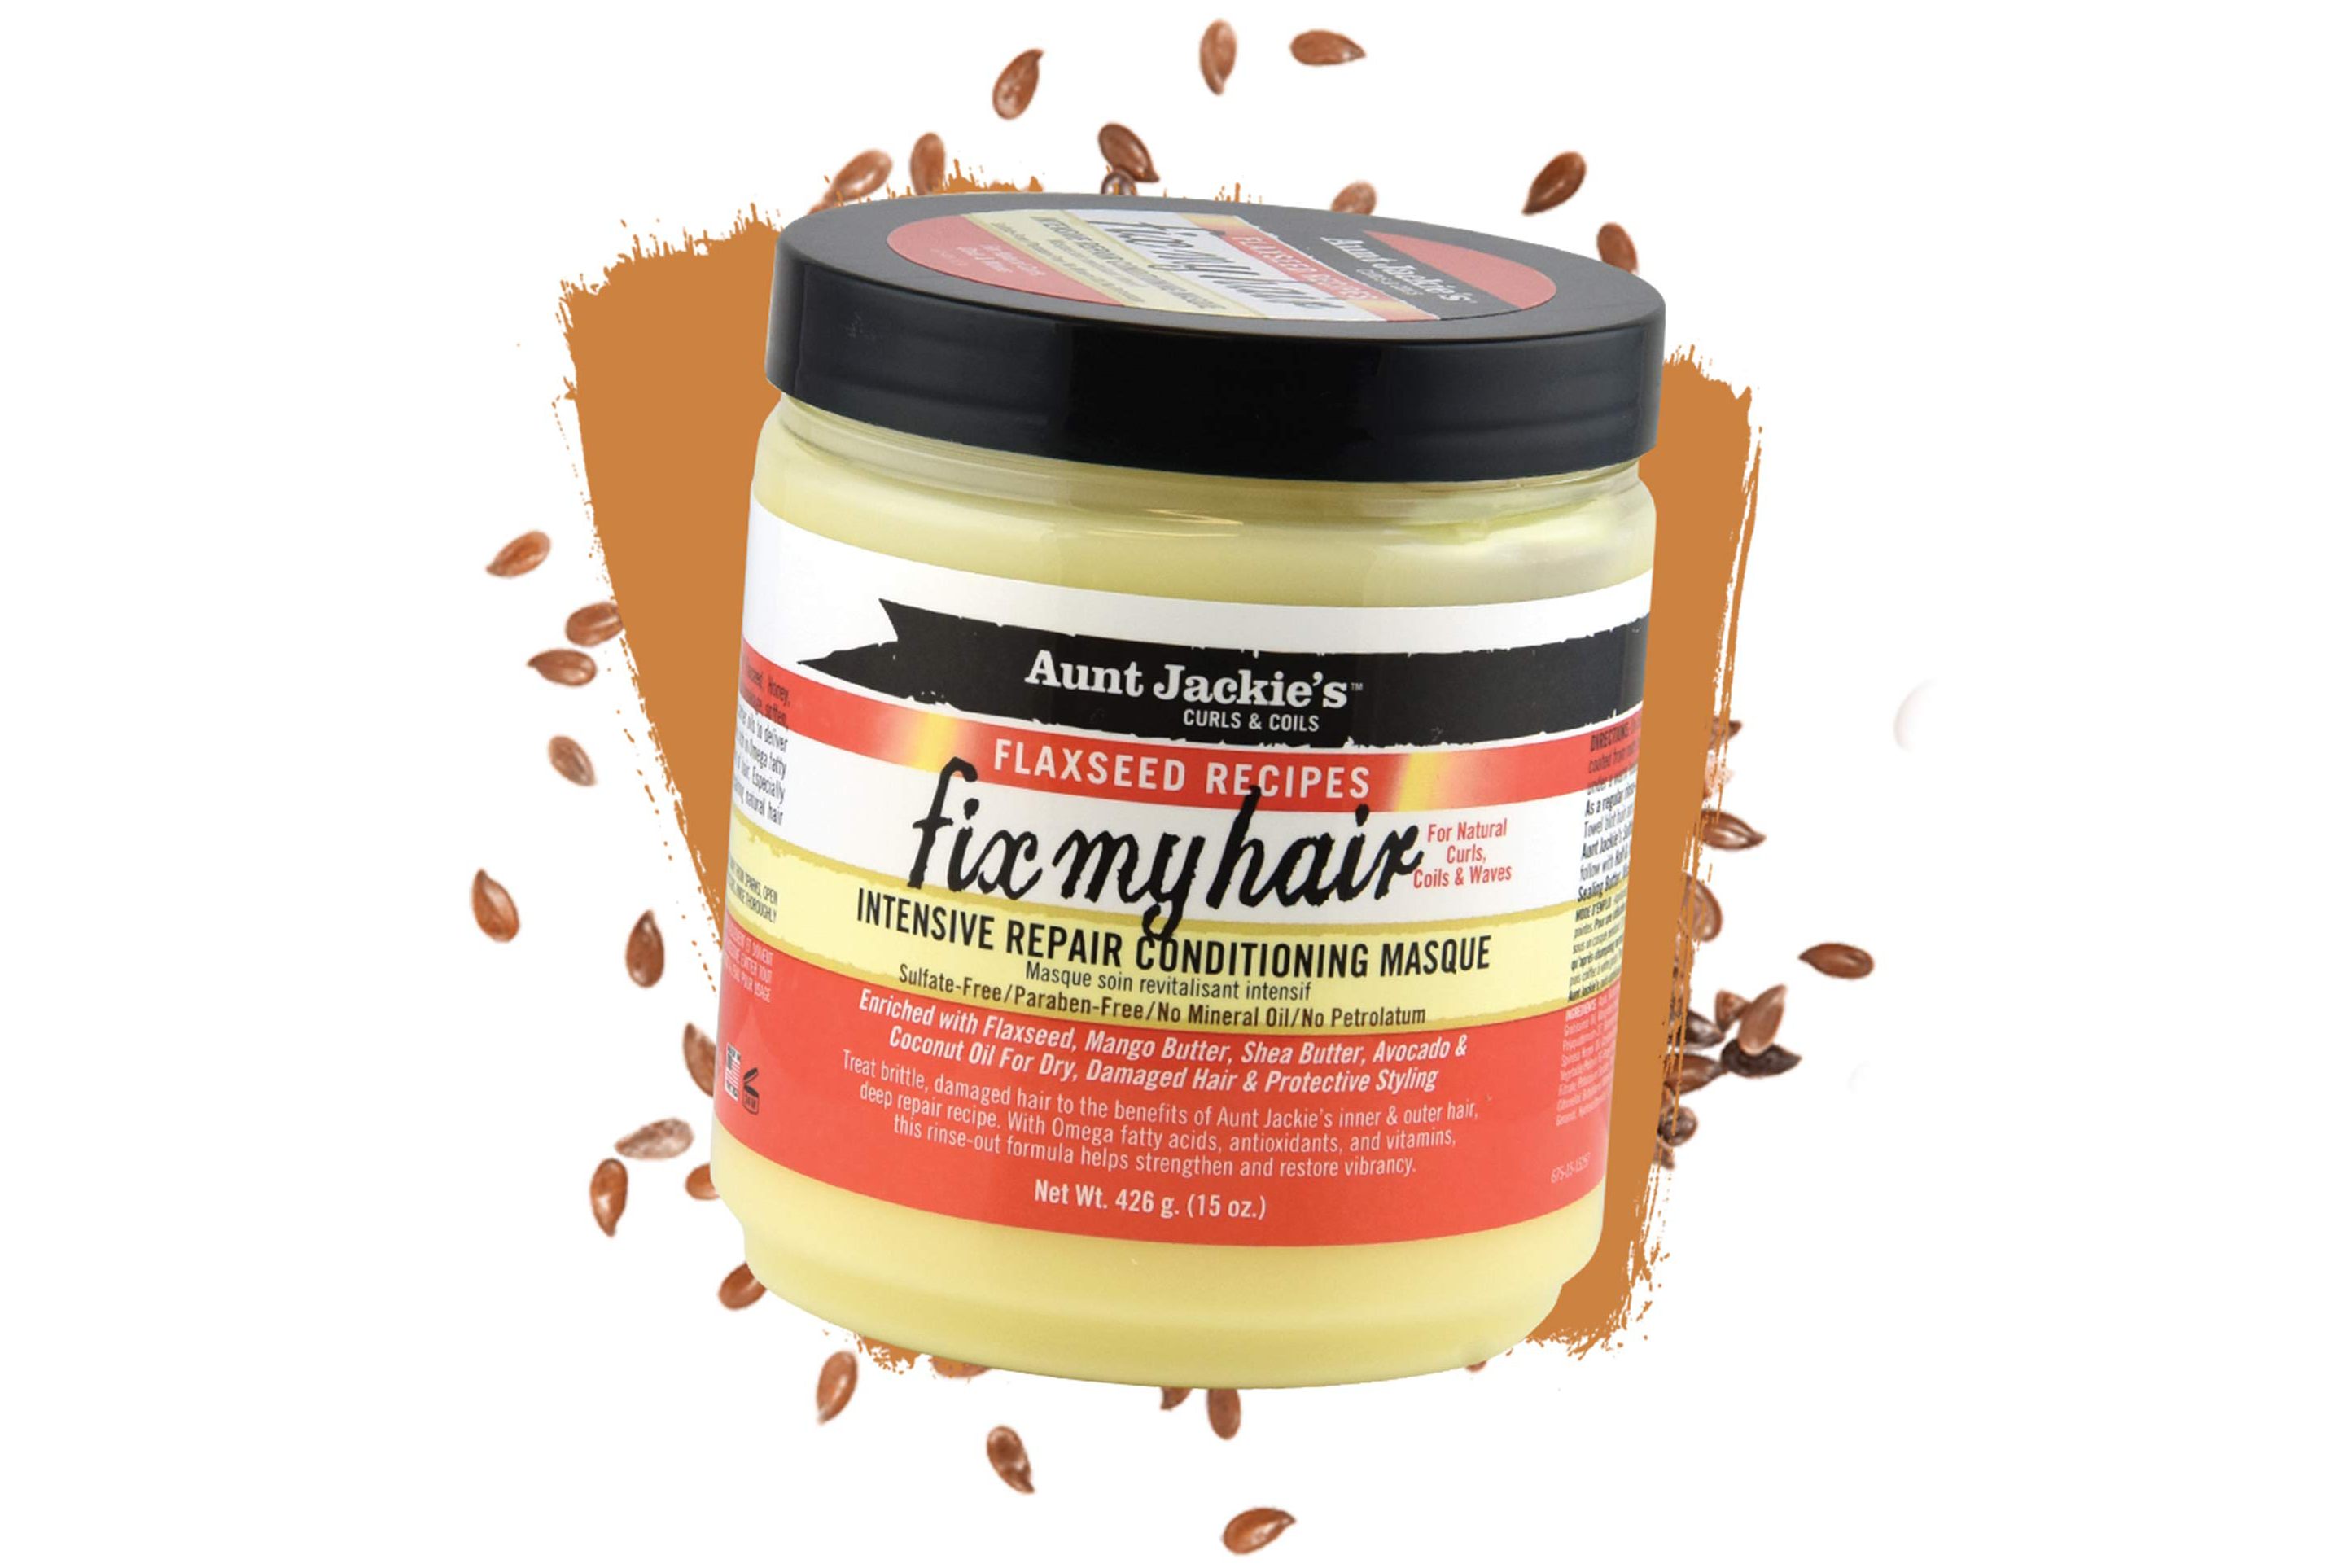 Aunt Jackie’s Curls & Coils Flaxseed Recipes Fix My Hair Intensive Repair Conditioning Masque